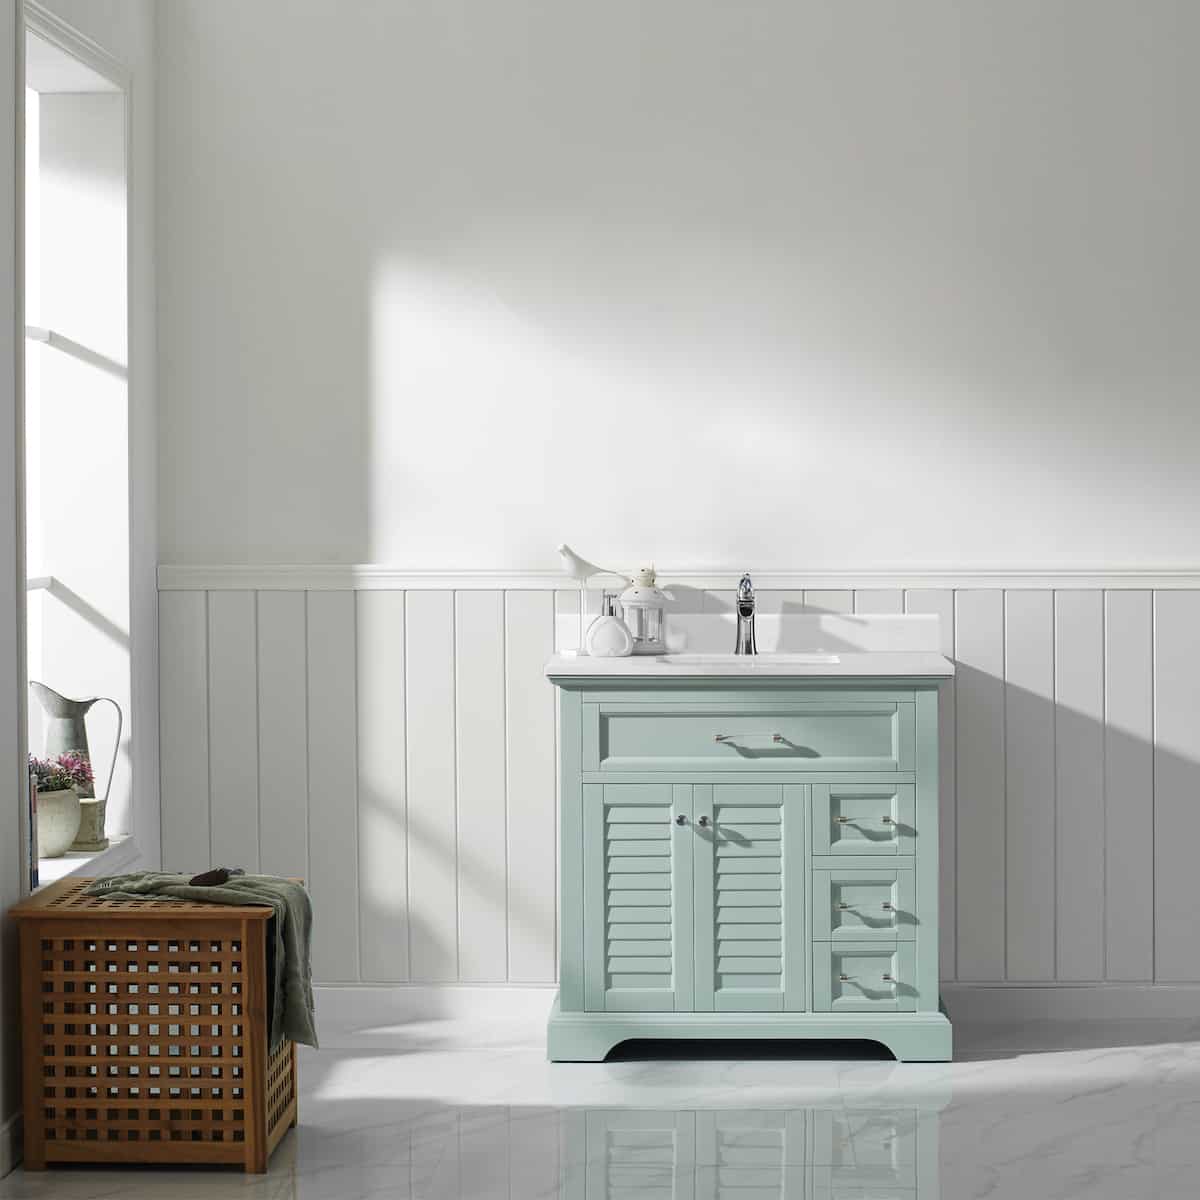 Vinnova Lorna 36 Inch Finnish Green Freestanding Single Vanity with Composite Carrara White Stone Countertop Without Mirror in Bathroom 783036-FG-WS-NM